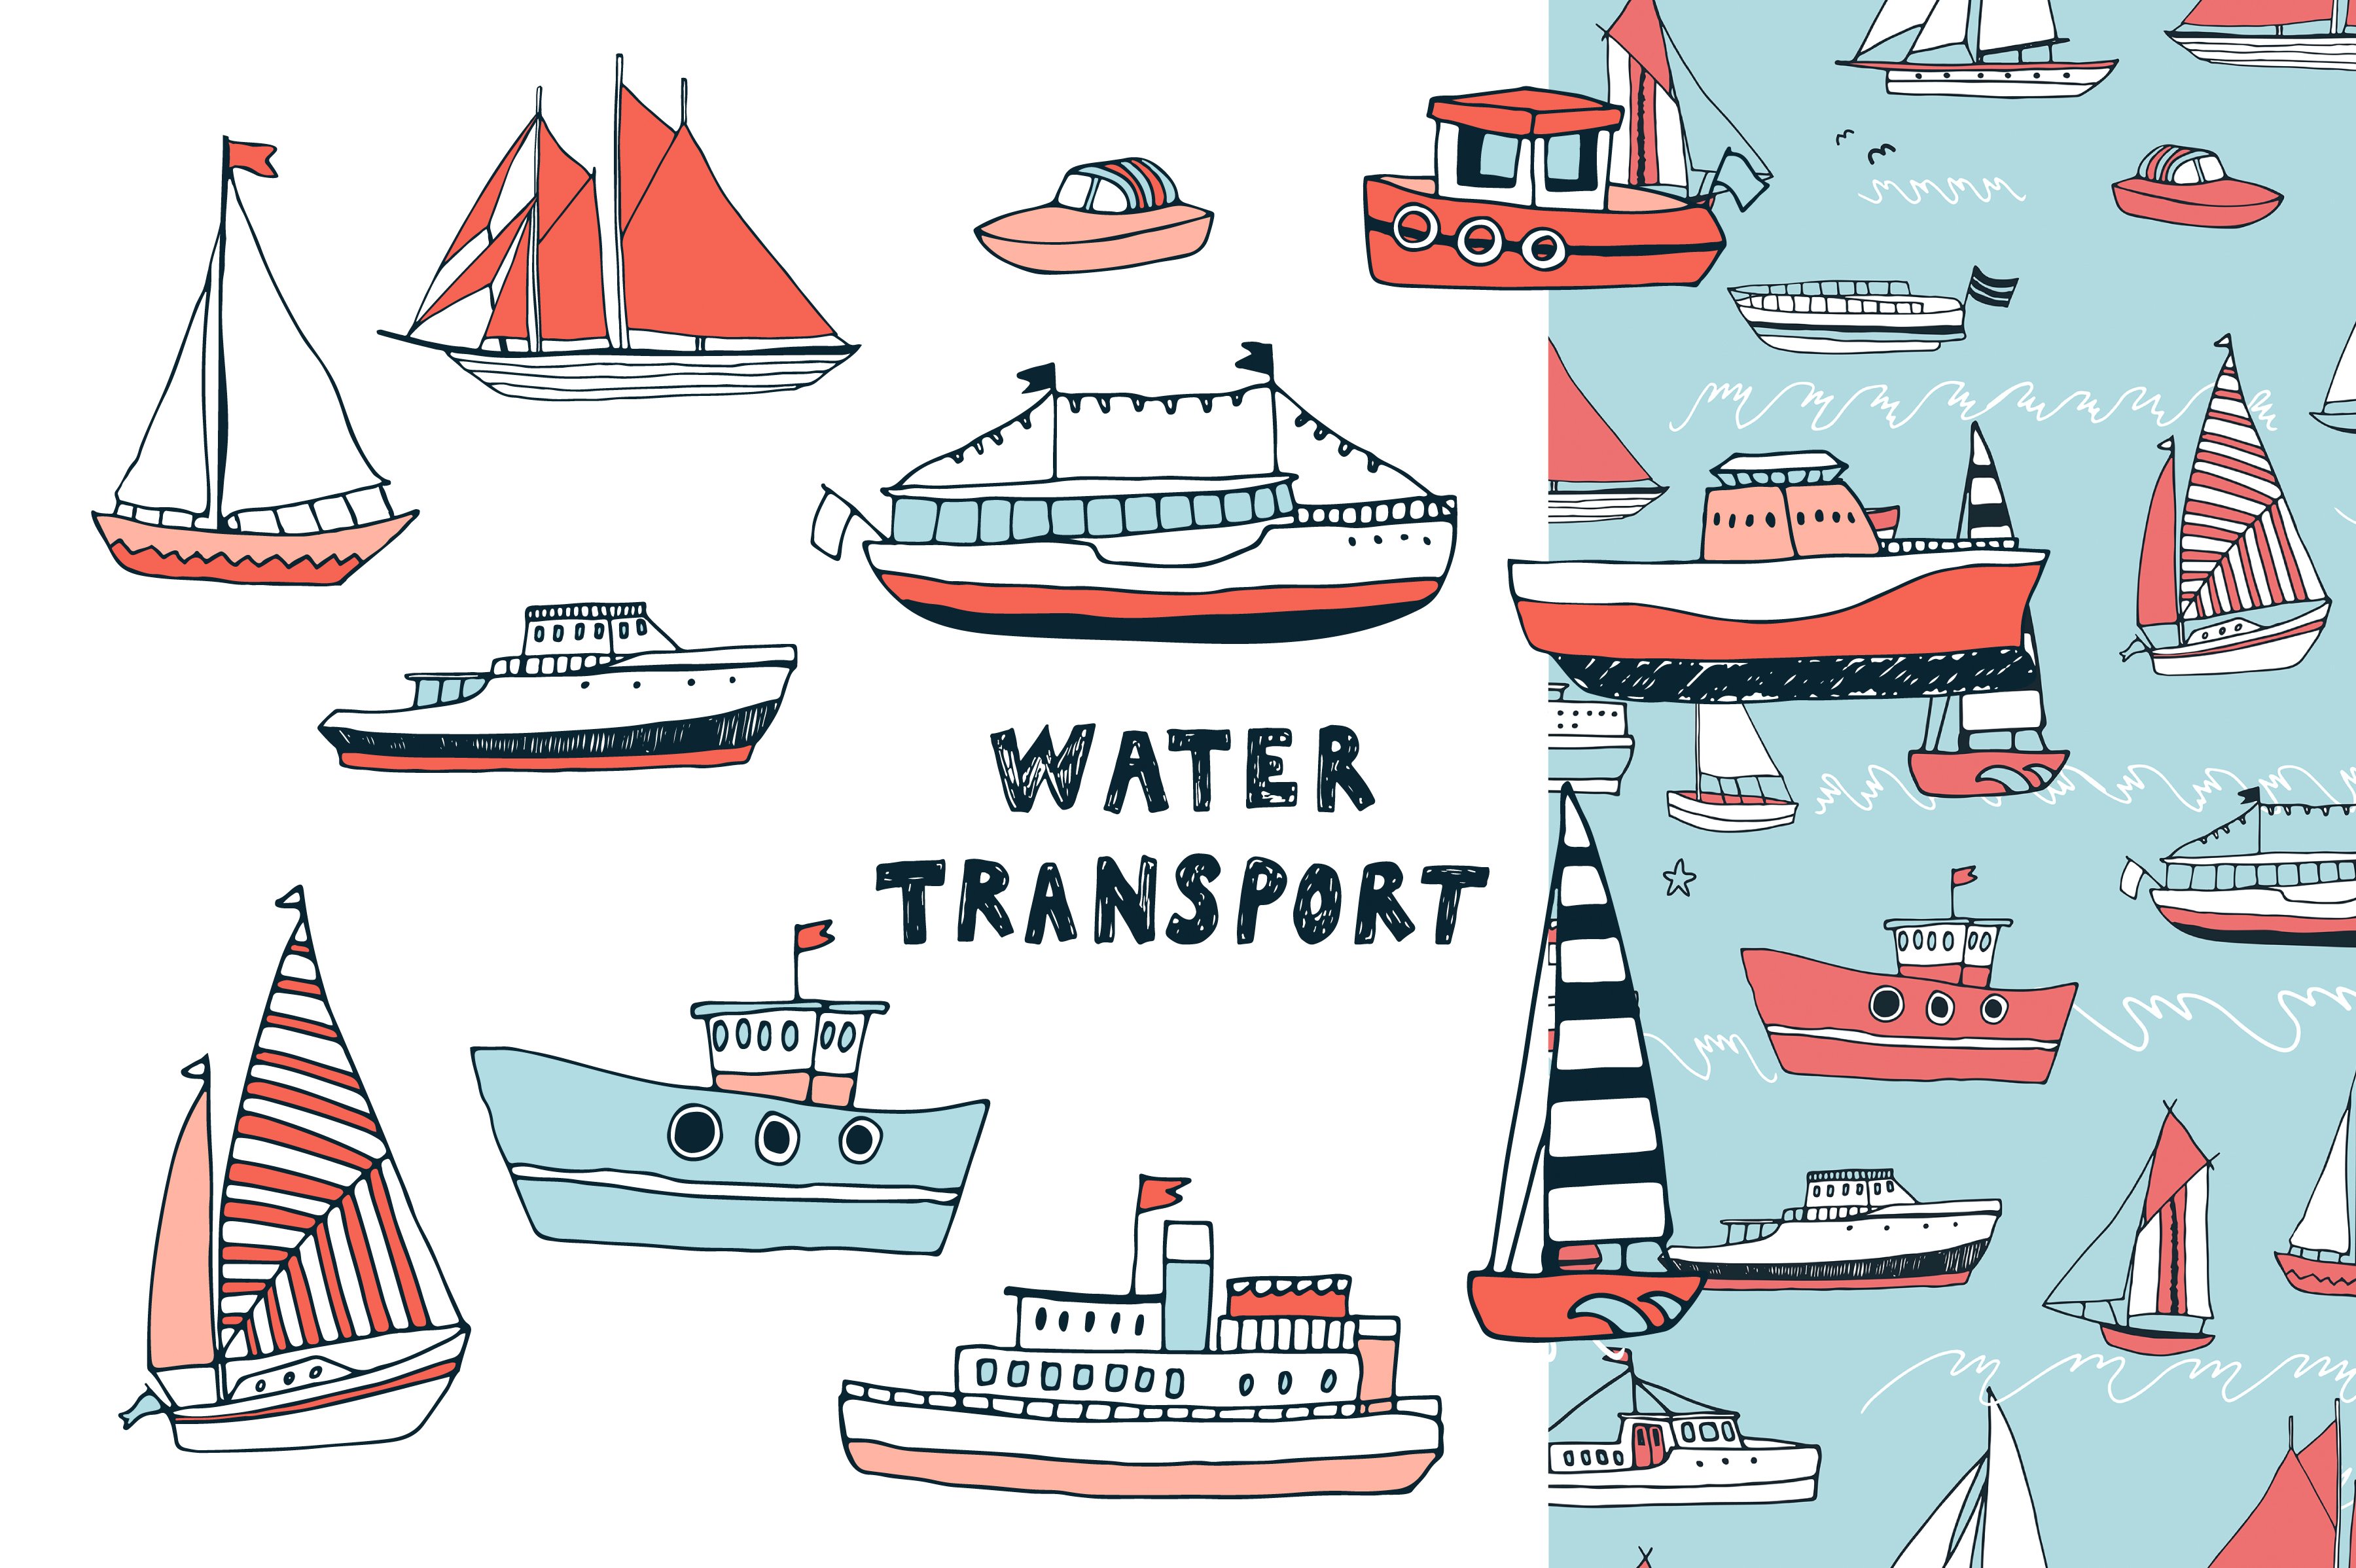 Cover image of Water Transport.